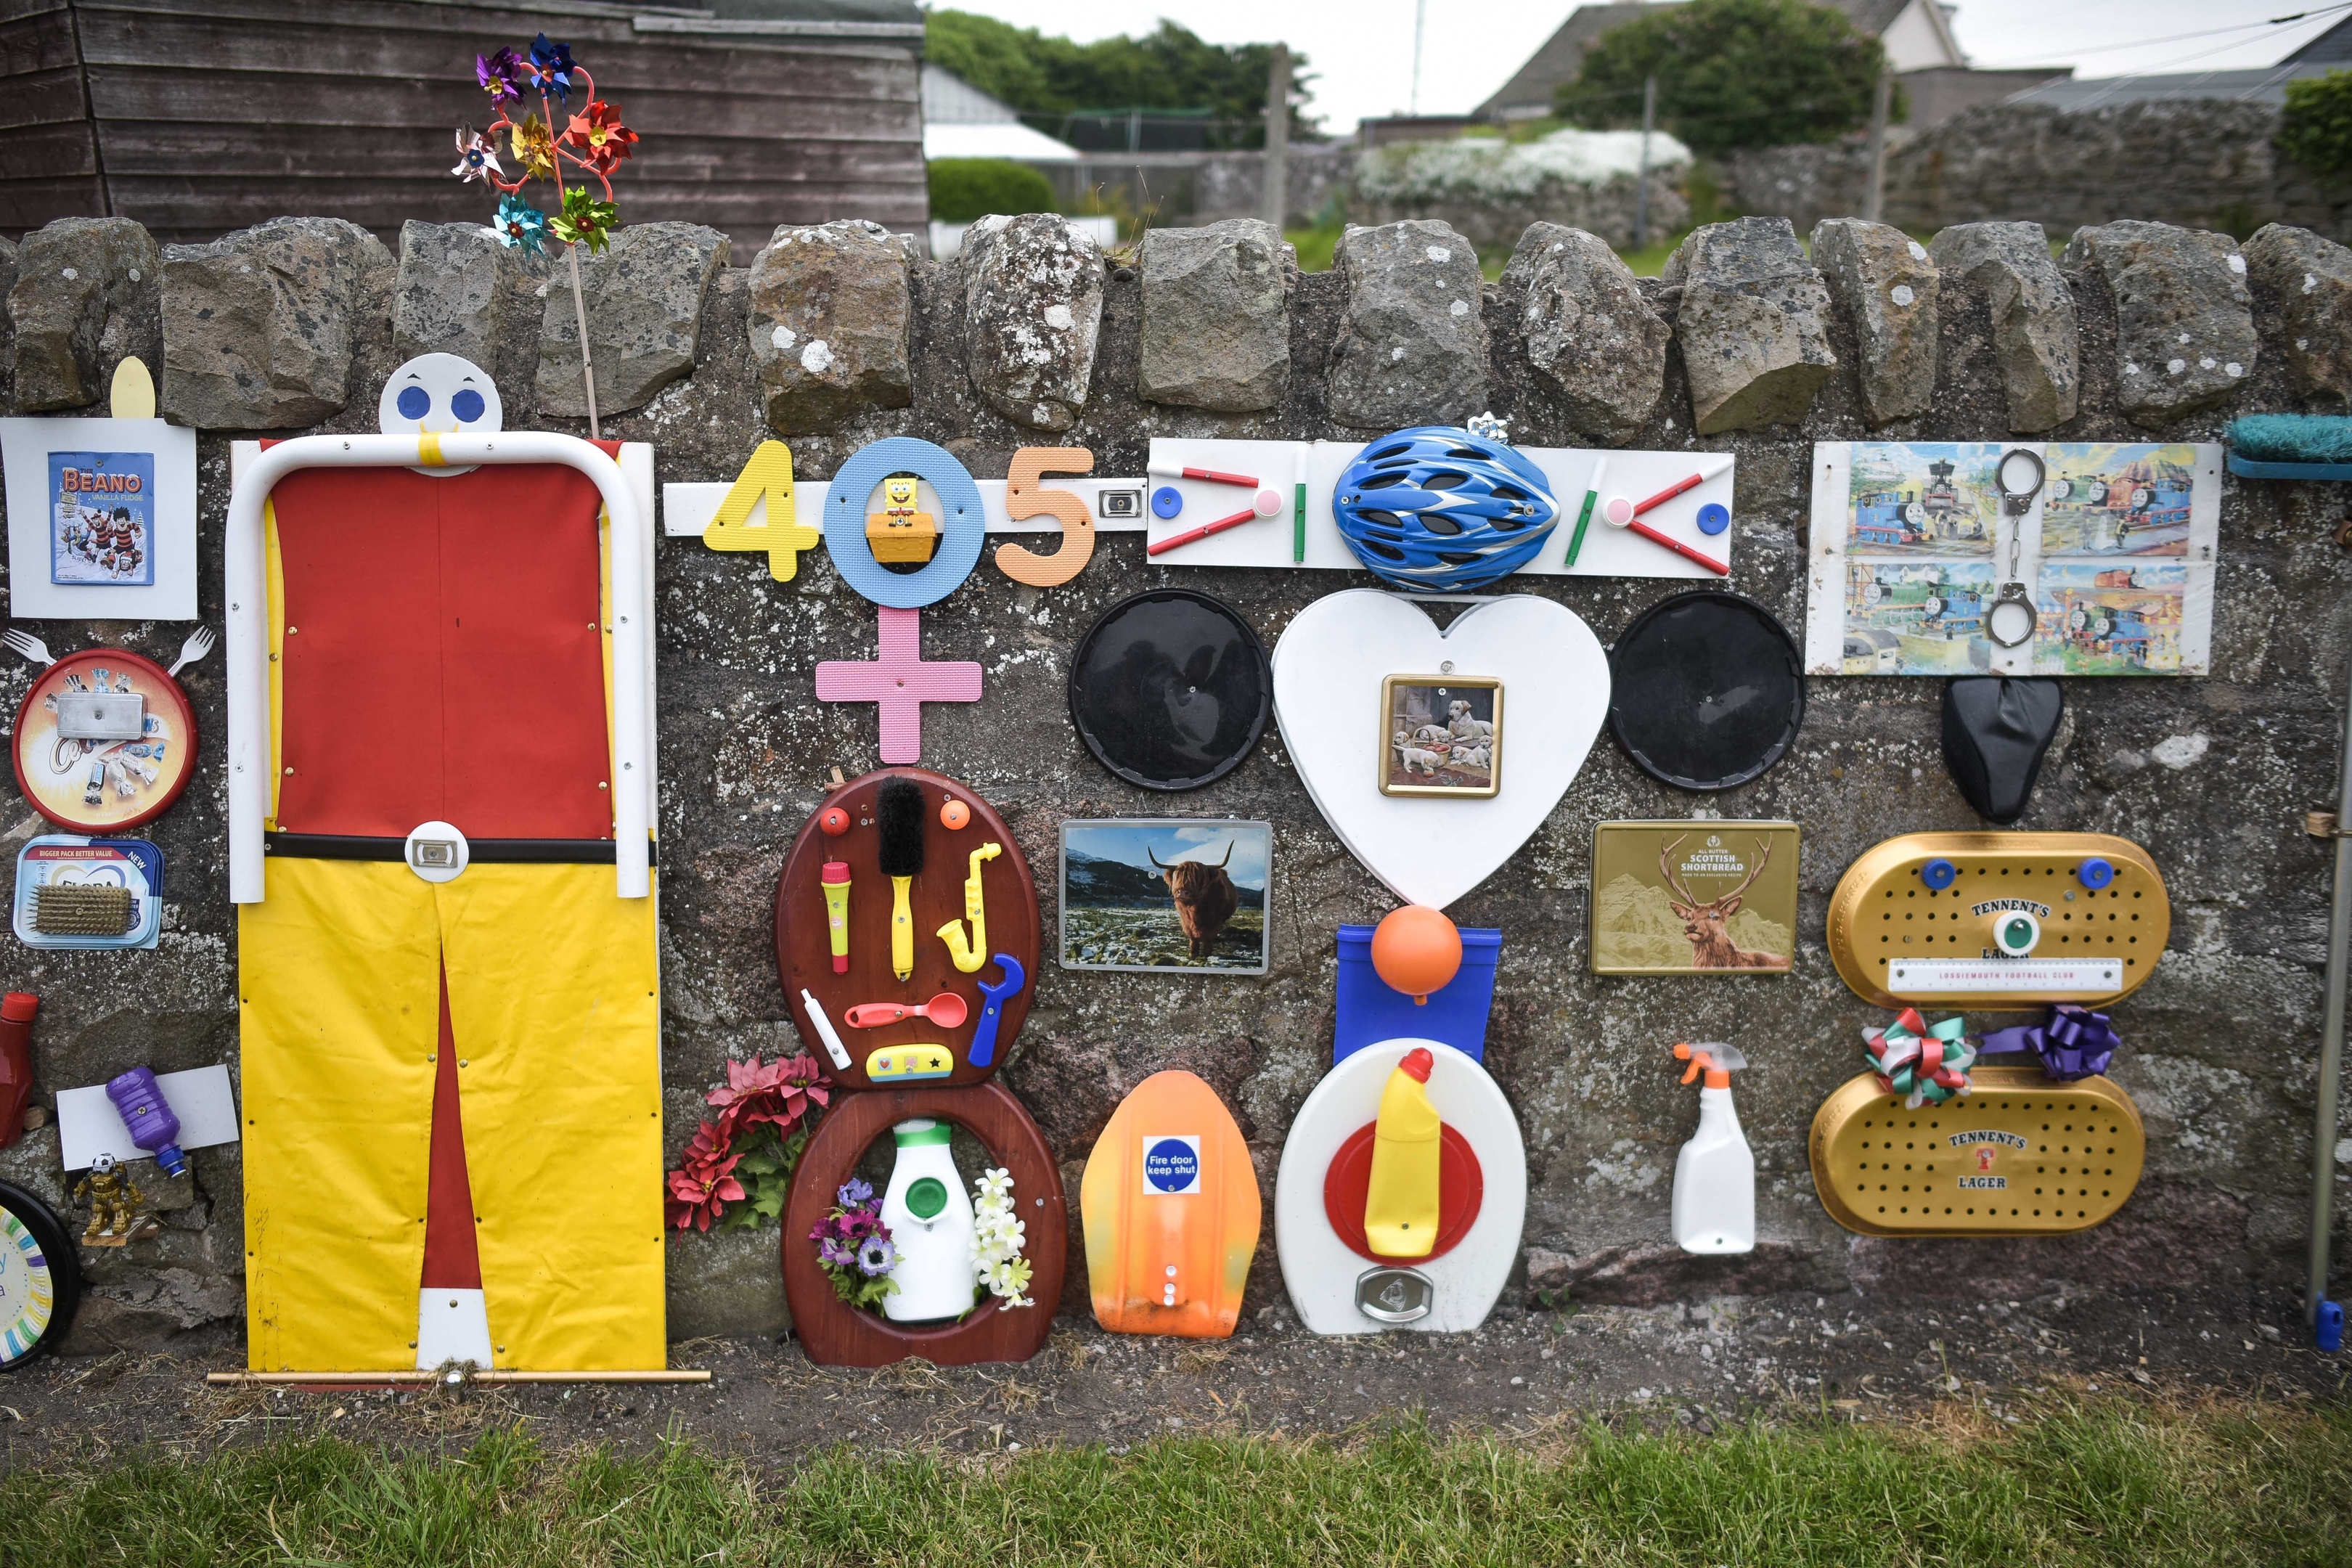 GV of the mural created by Charley Whyte, 76, on a wall in Lossiemouth, Moray on June 09 2016. Mr Whyte started the mural with just a chair in the corner as somewhere to sit during his evening walk. Since then he's added numerous other trinkets to the wall.  See Centre Press story CPLOO; A defiant retired plumber says he will not remove a bizarre mural he made from loo seats and toilet brushes. Charley Whyte, 76, started making the public artwork last August so that he could “brighten the place up”. And despite complaints from local residents, Charley said he won’t take down the mural in Lossiemouth, Moray. The mural, covered in random objects such as toilet brushes, loo seats and even Frisbees, stands at the entrance to Charley’s street. It is one of the first things drivers will see as they make their way into the town.